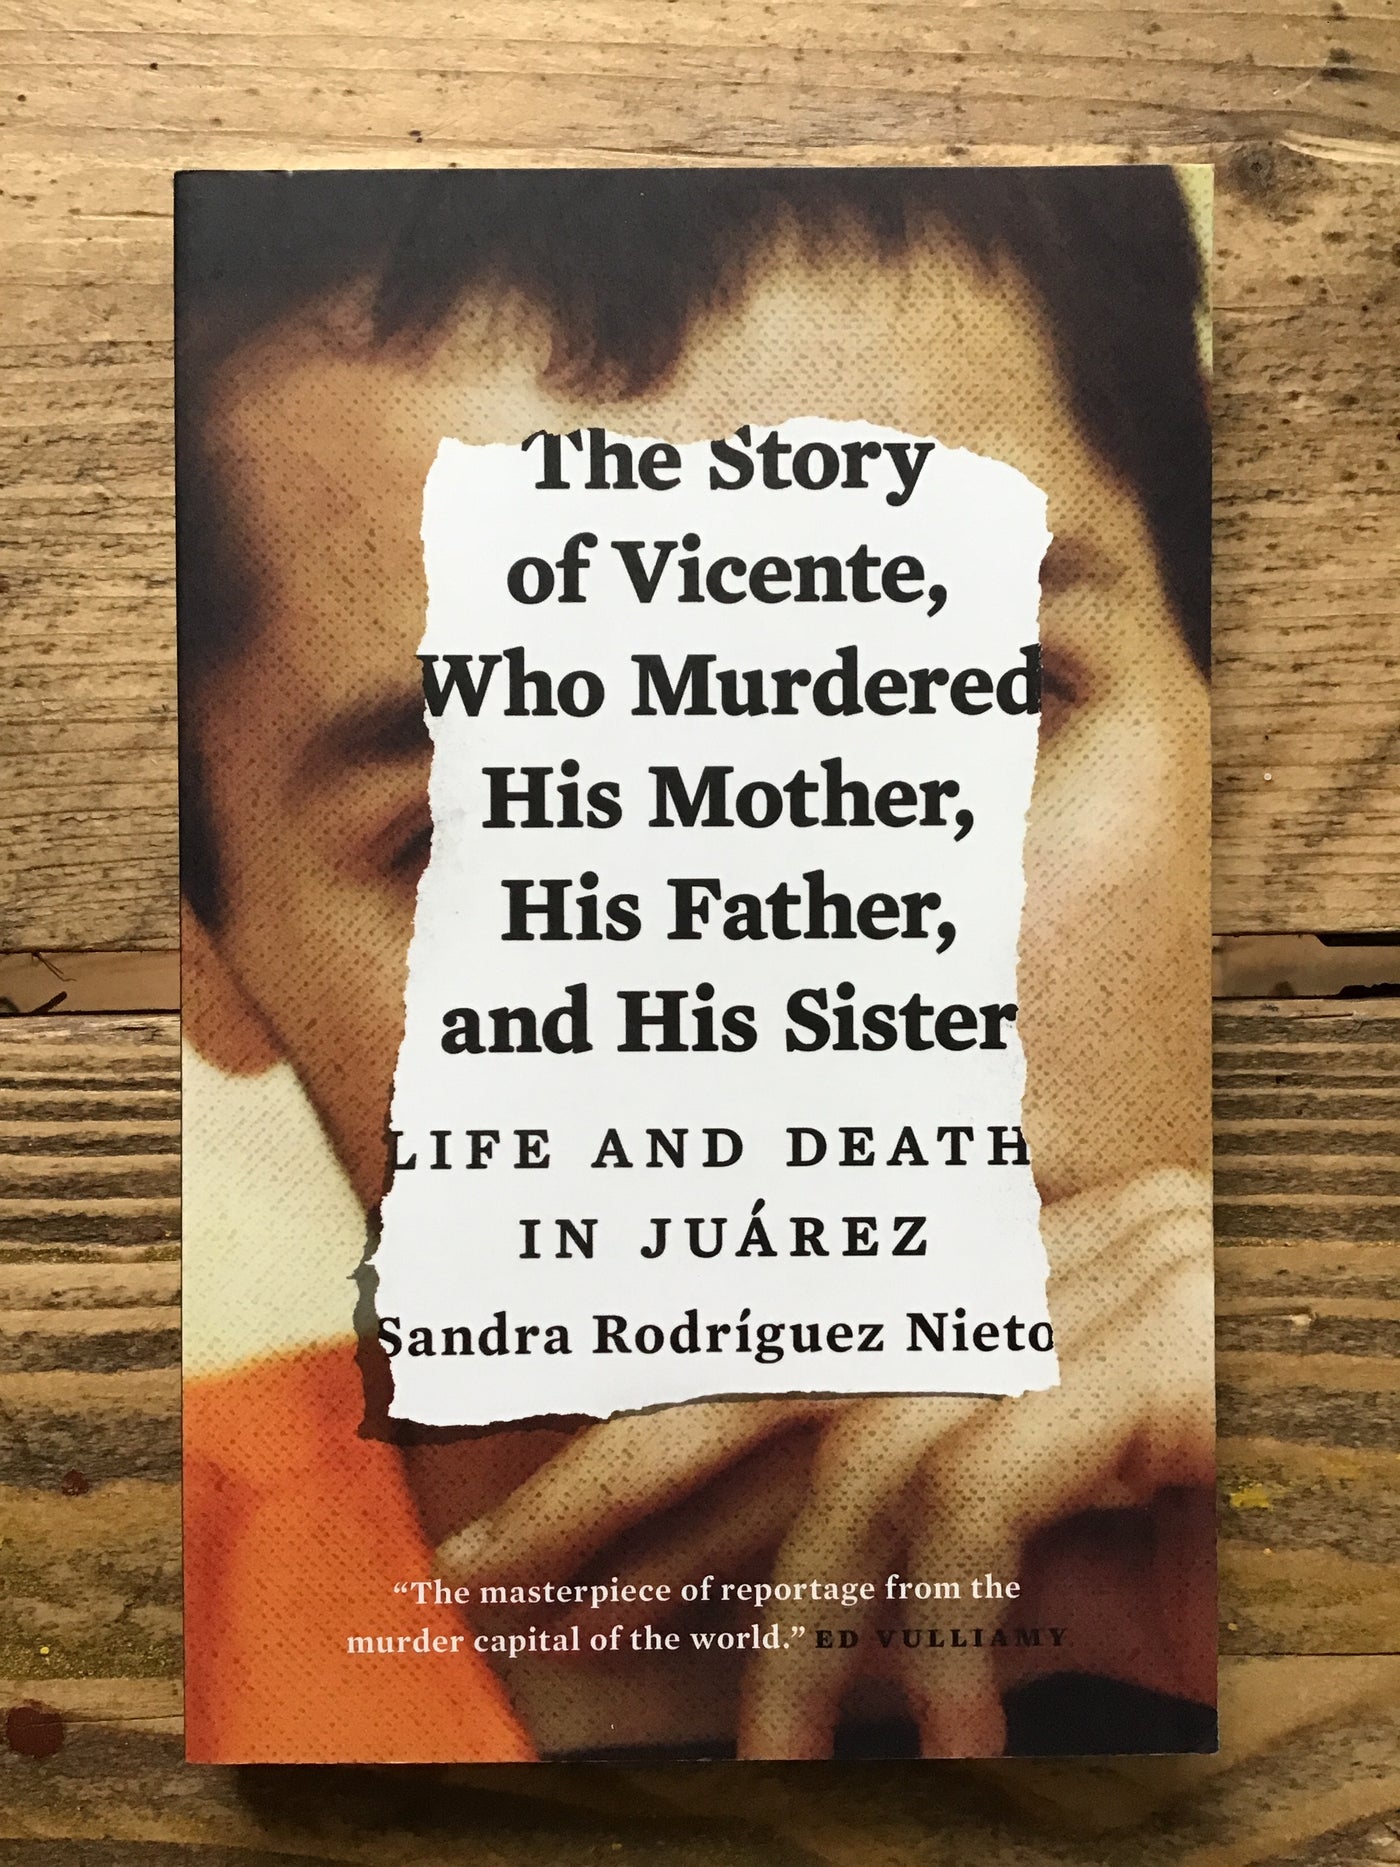 Story of Vicente, Who Murdered His Mother, His Father, and His Sister